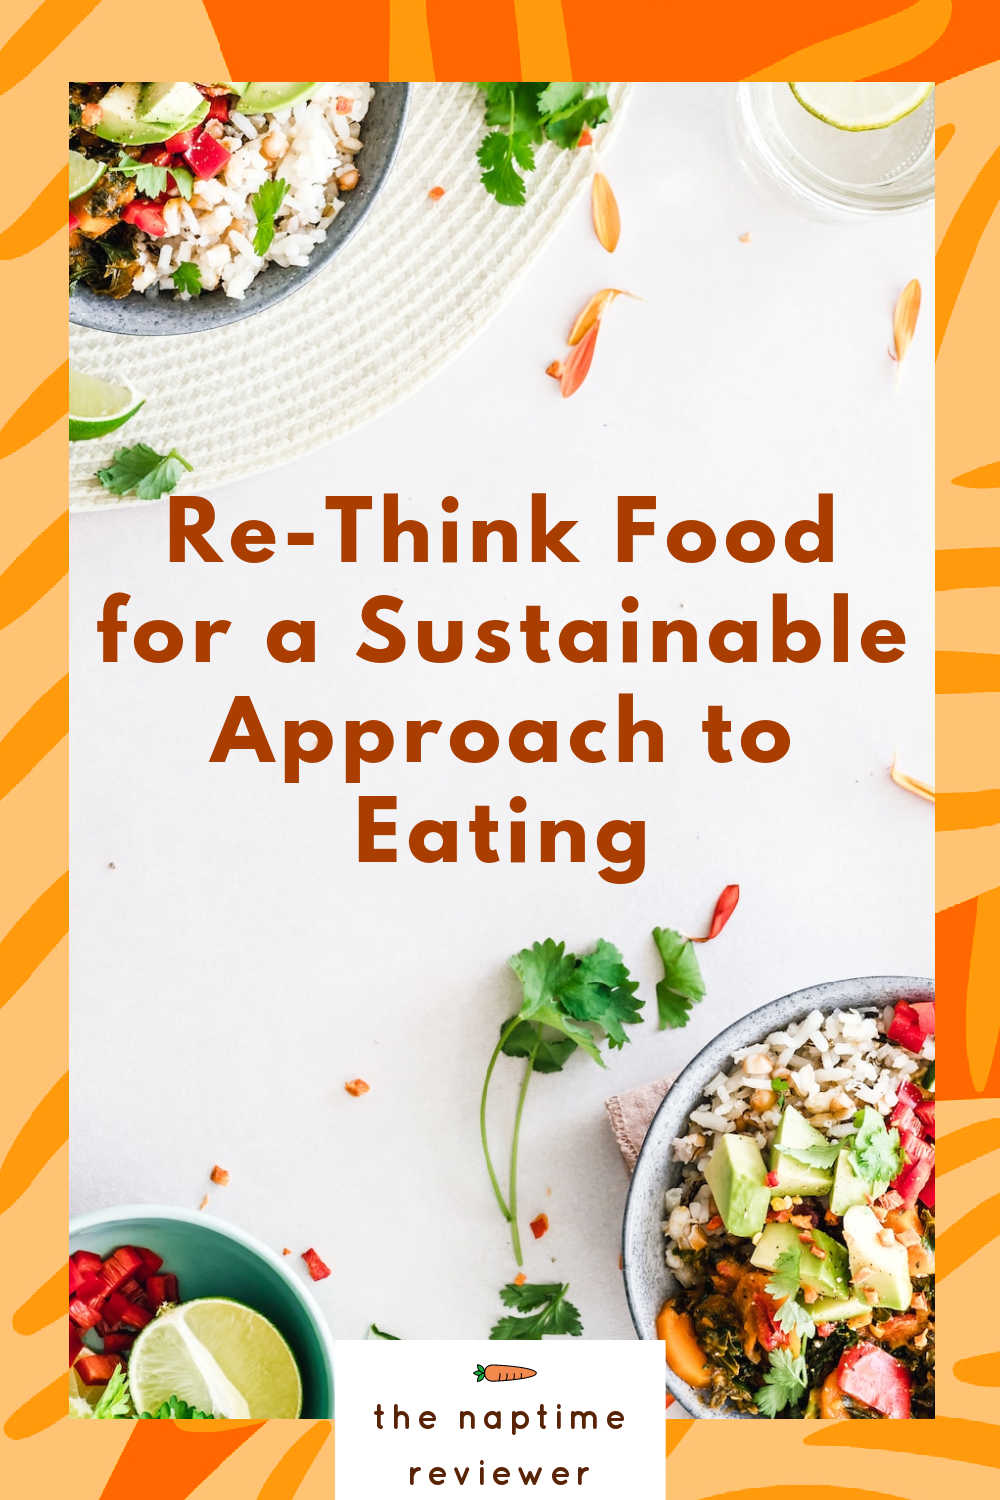 Re-Think Food for a Sustainable Approach to Eating